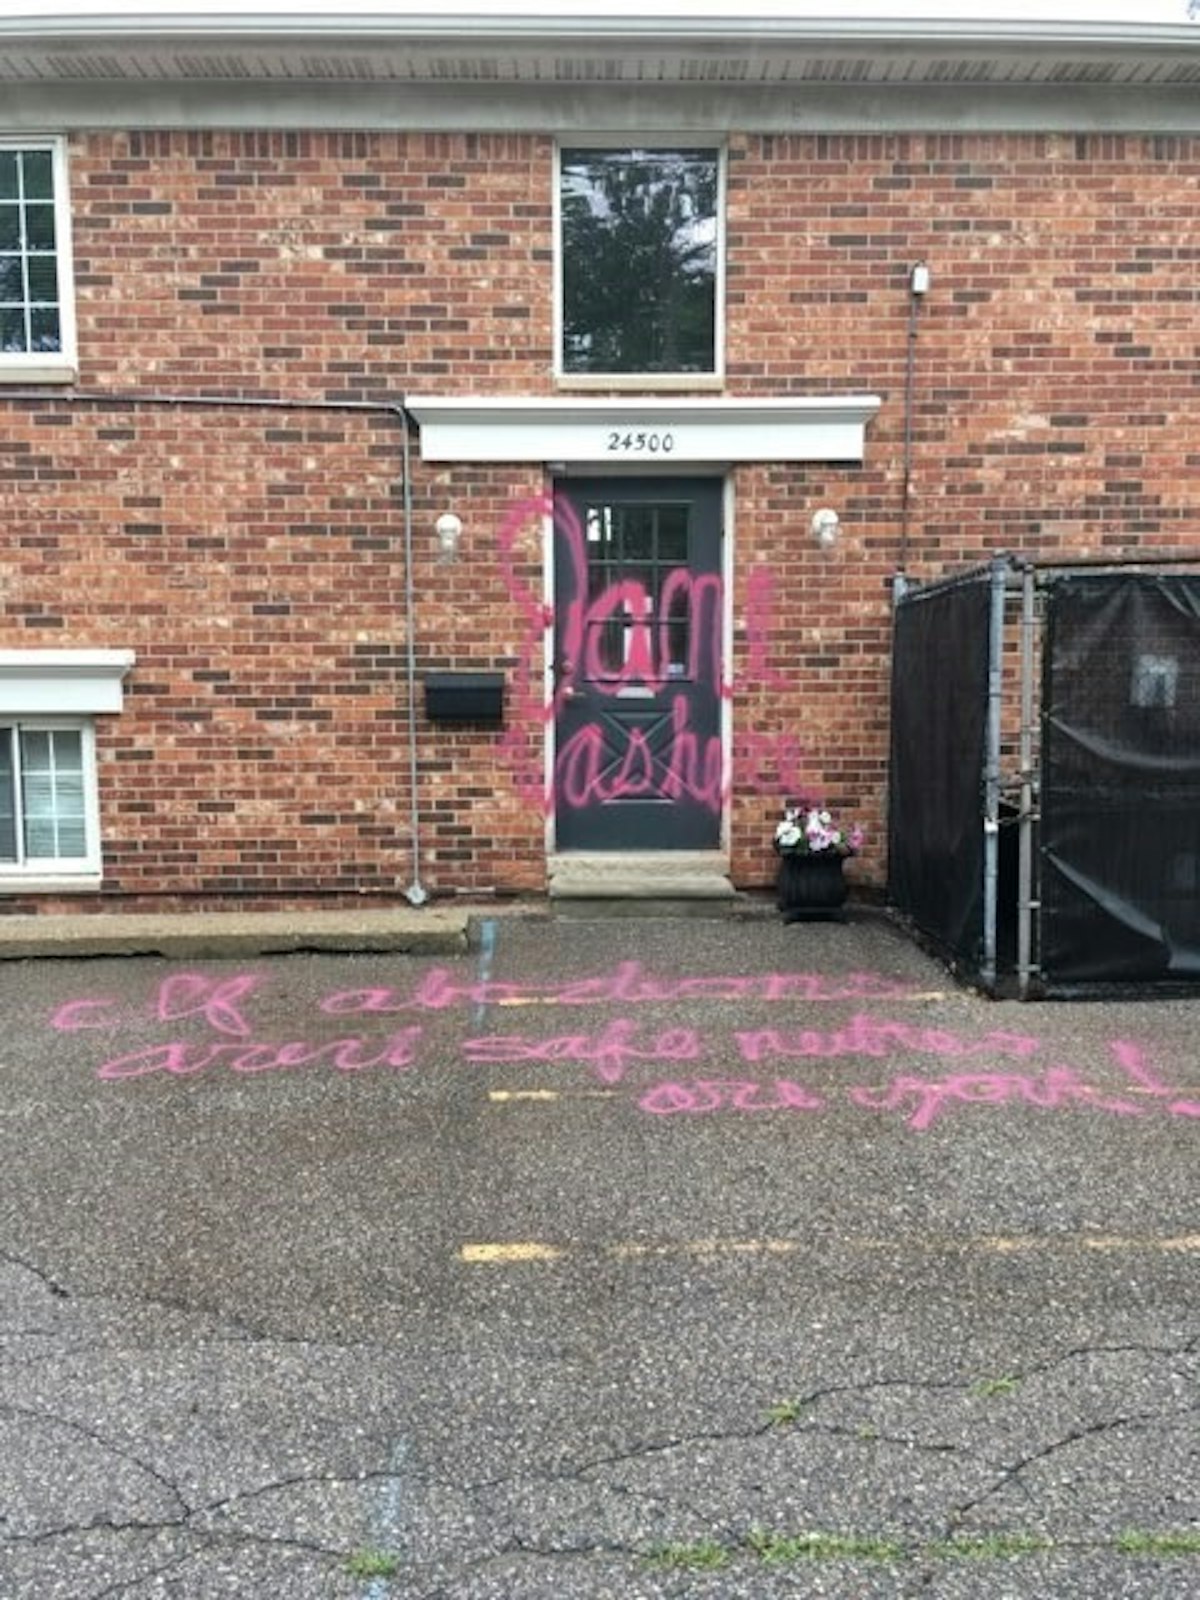 The Southfield-based pregnancy center was also attacked in June, when vandals left a similar message, said Jake McGrath, chairman of the center's board of directors.